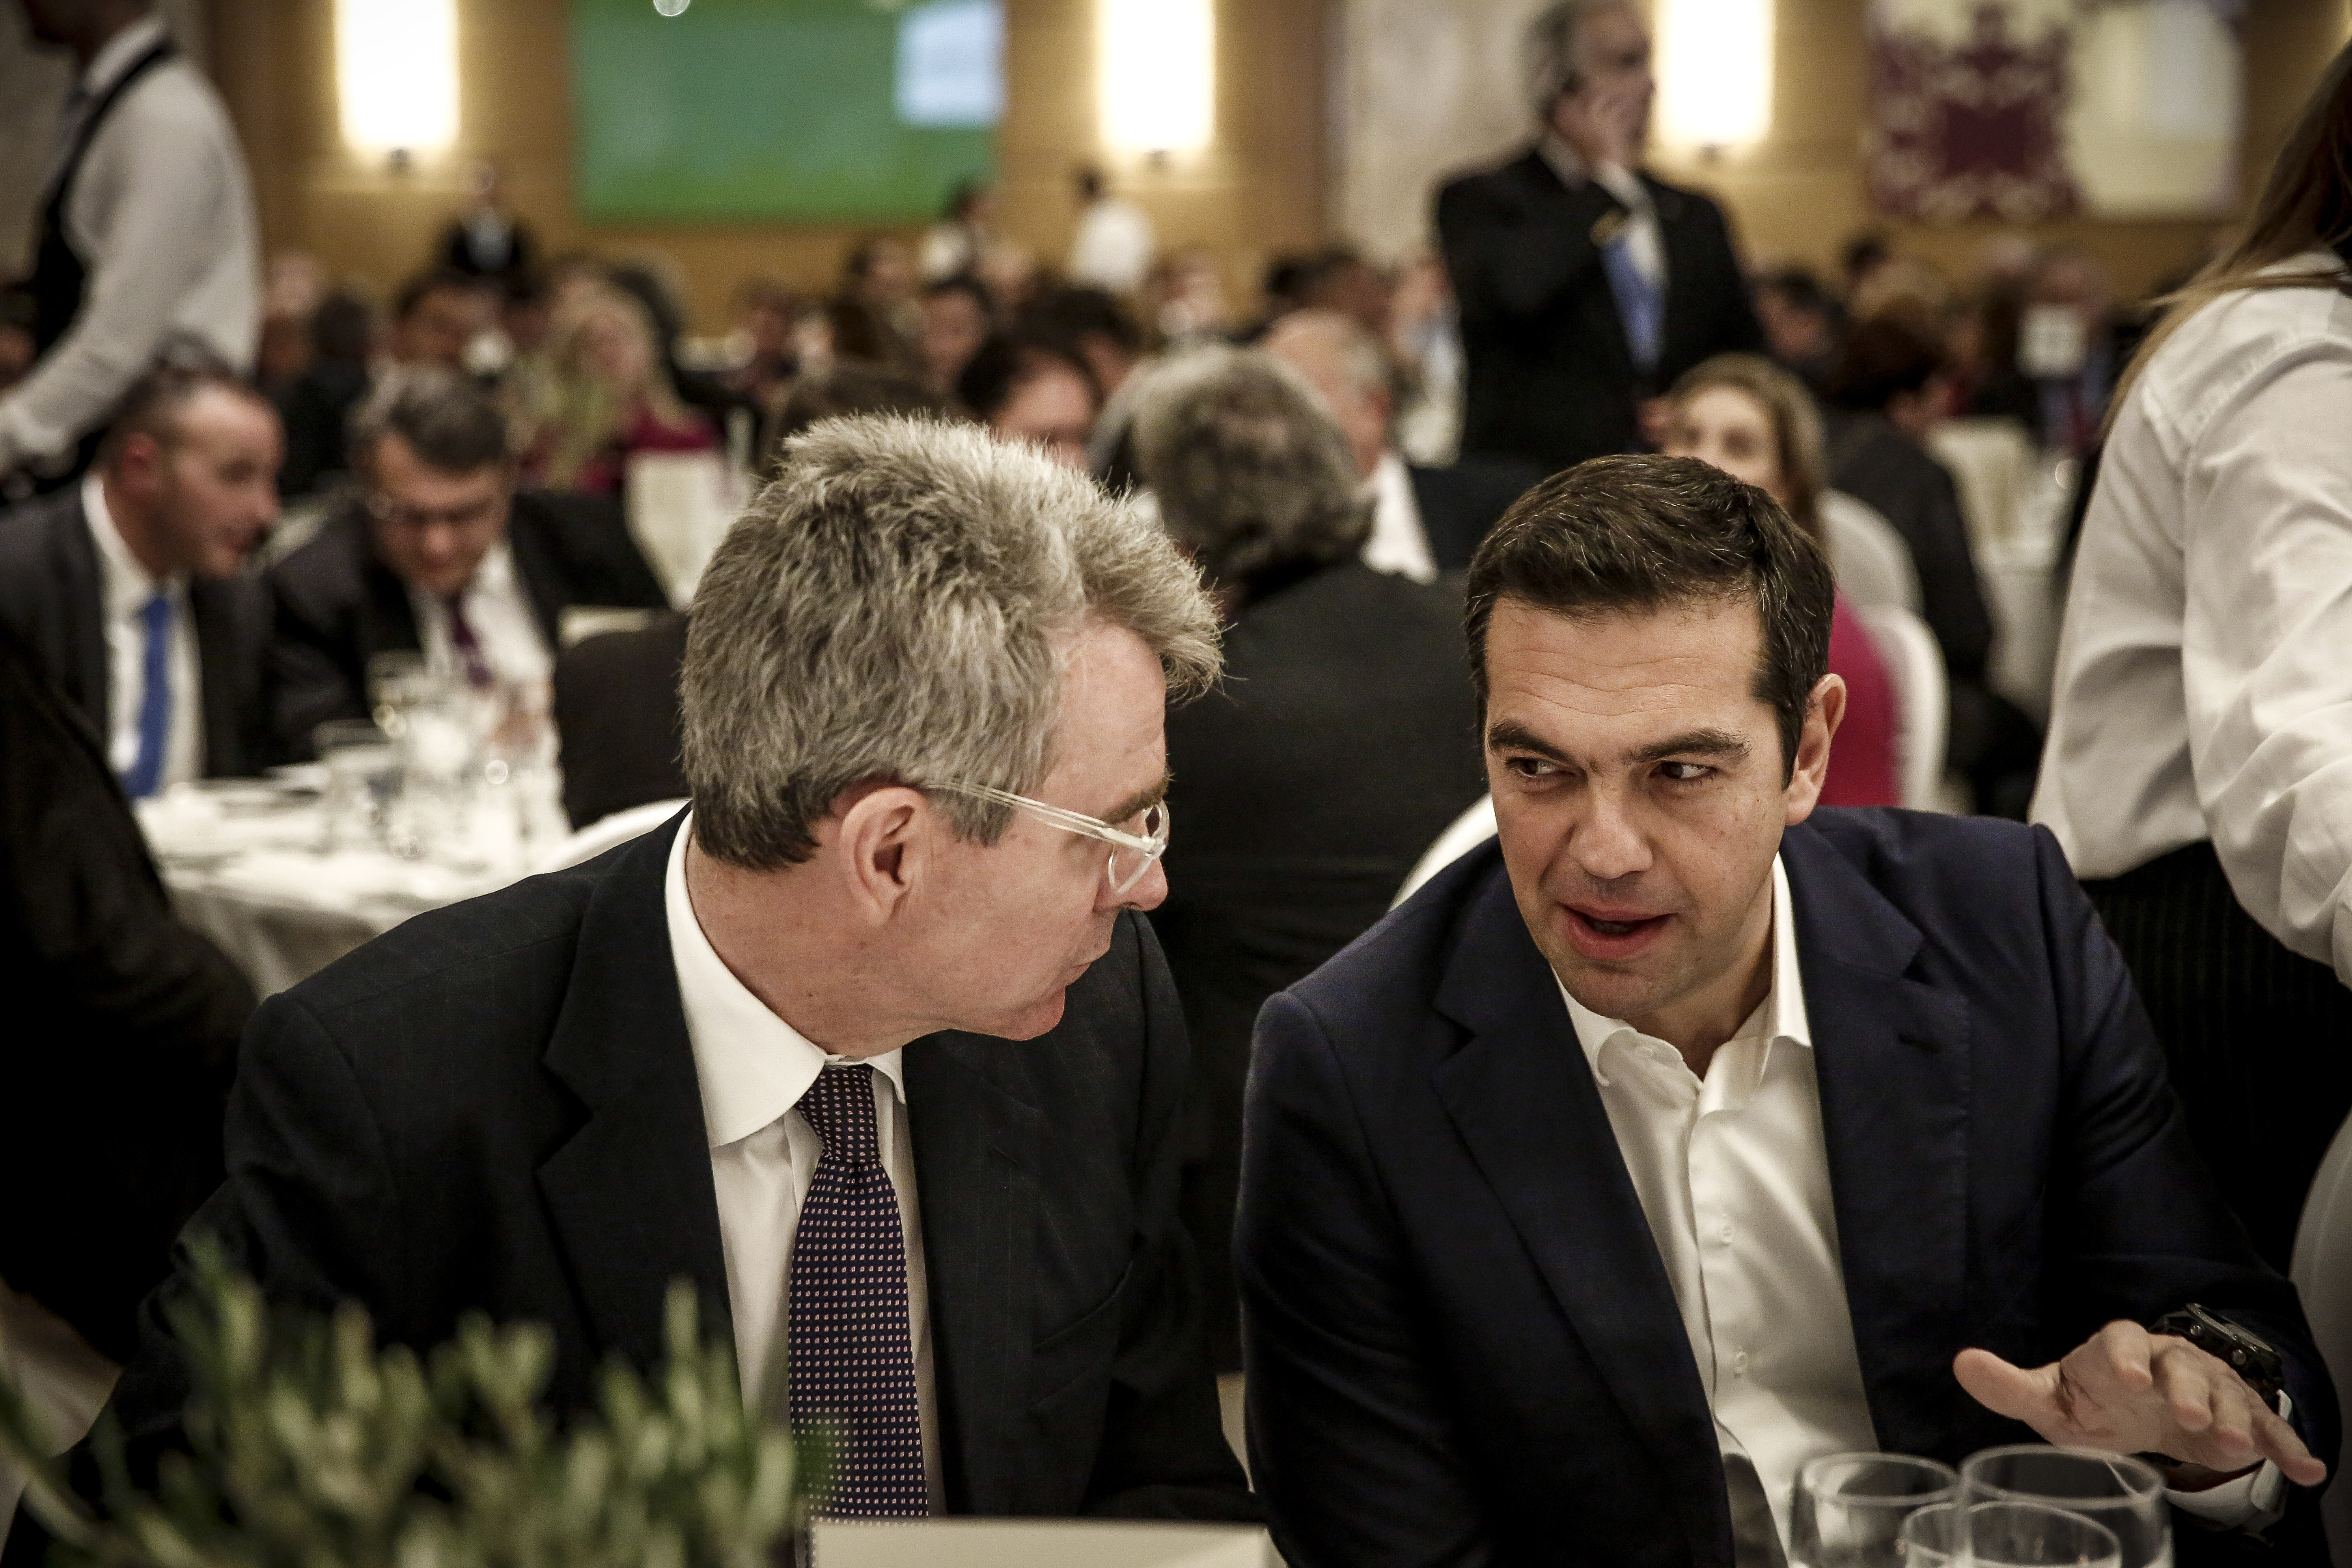 Tsipras tells investment forum that Greece is ‘land of opportunity’